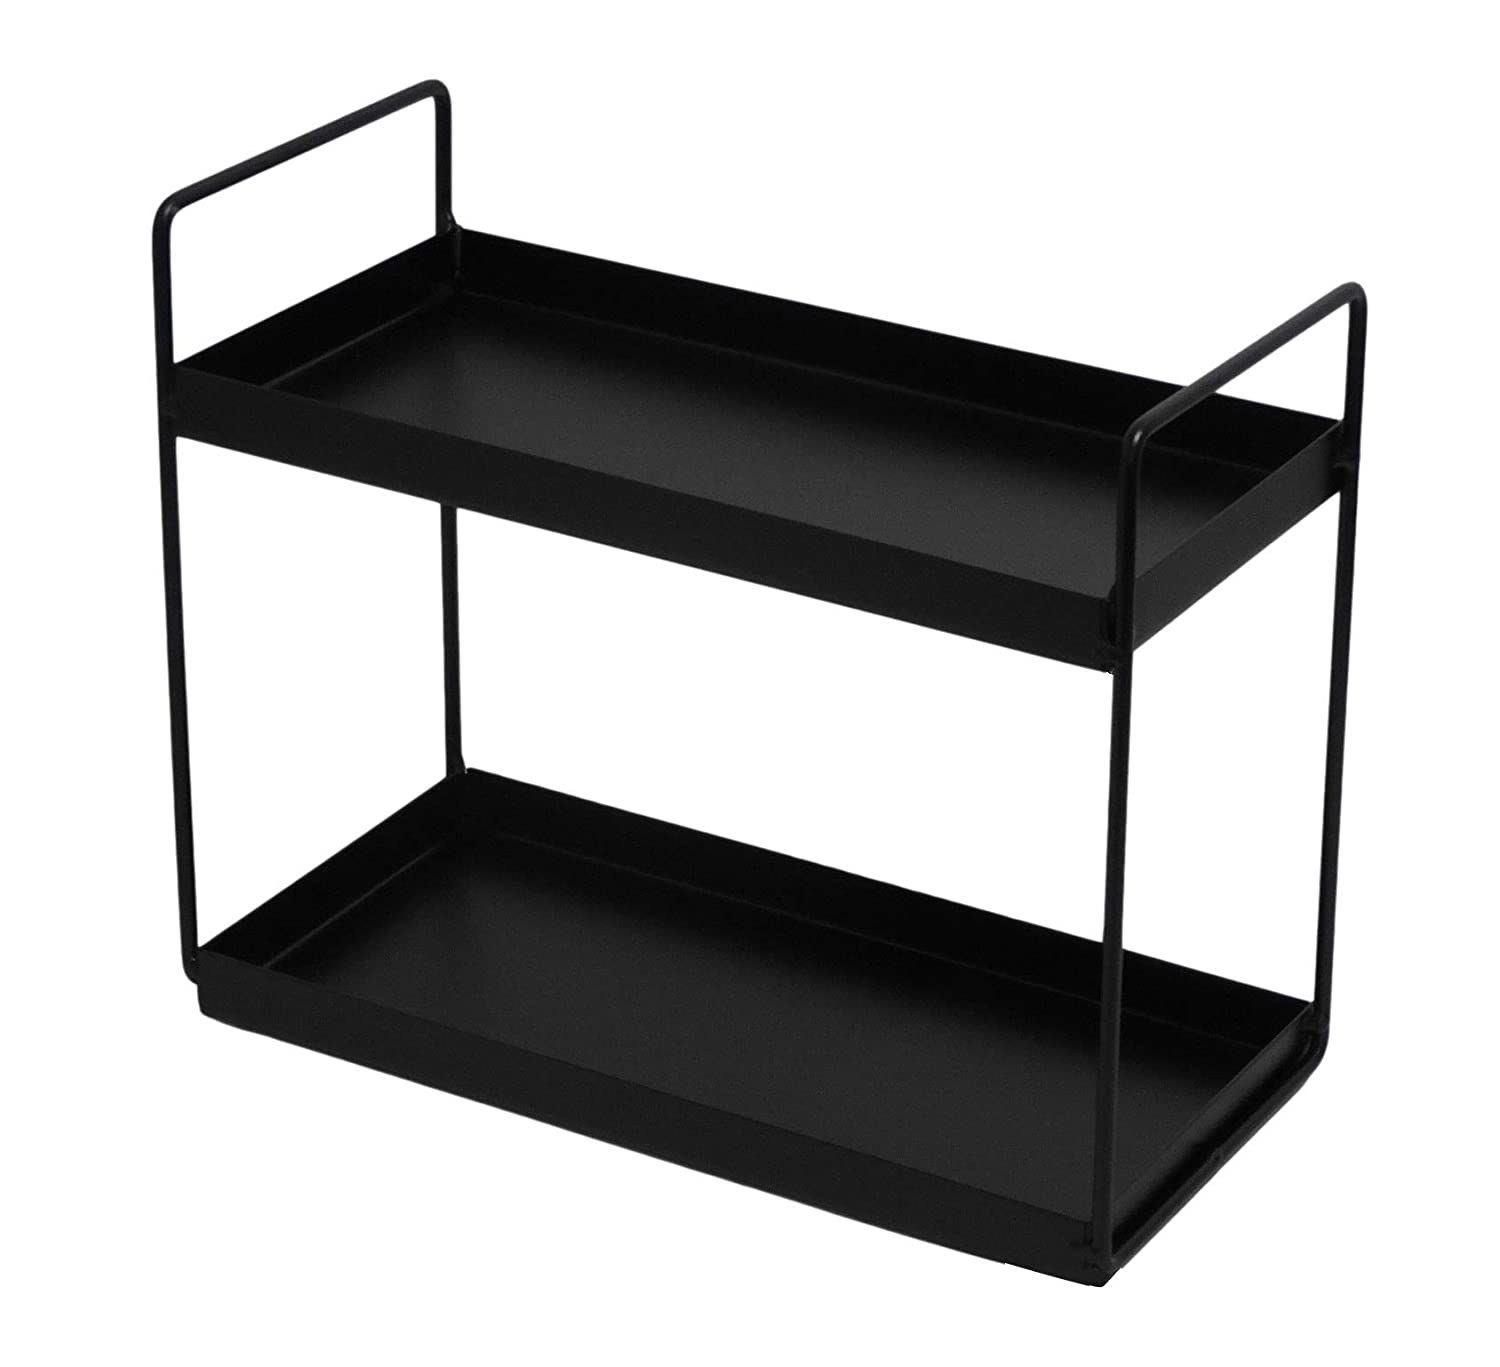 A black two-tier rack.